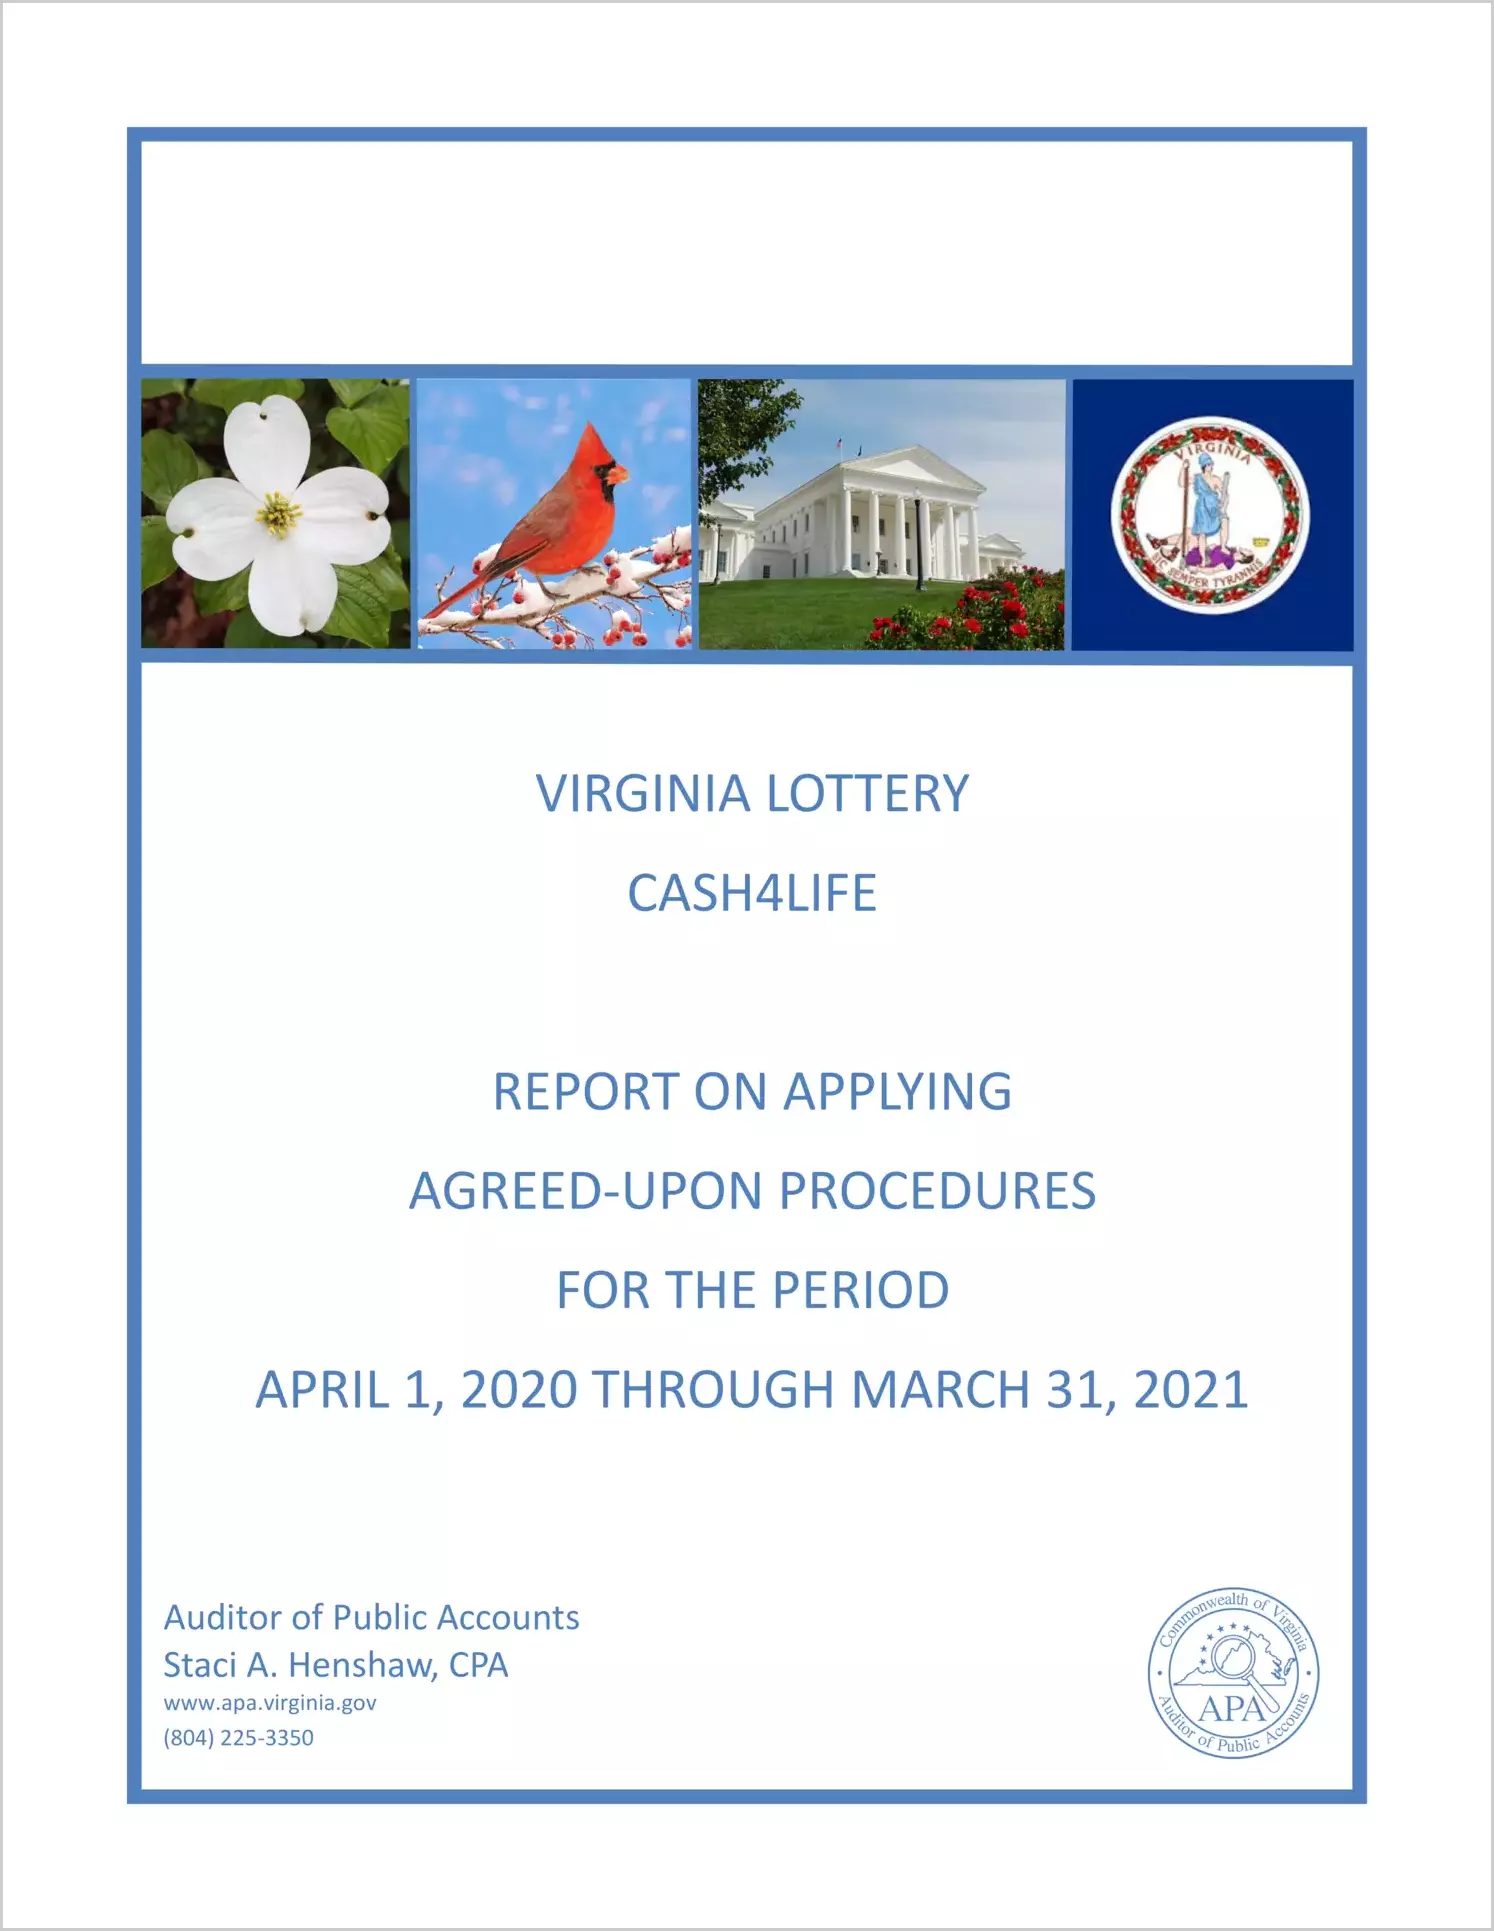 Virginia Lottery Cash4Life Report on Applying Agreed-Upon Procedures for the period April 1, 2020 through March 31, 2021